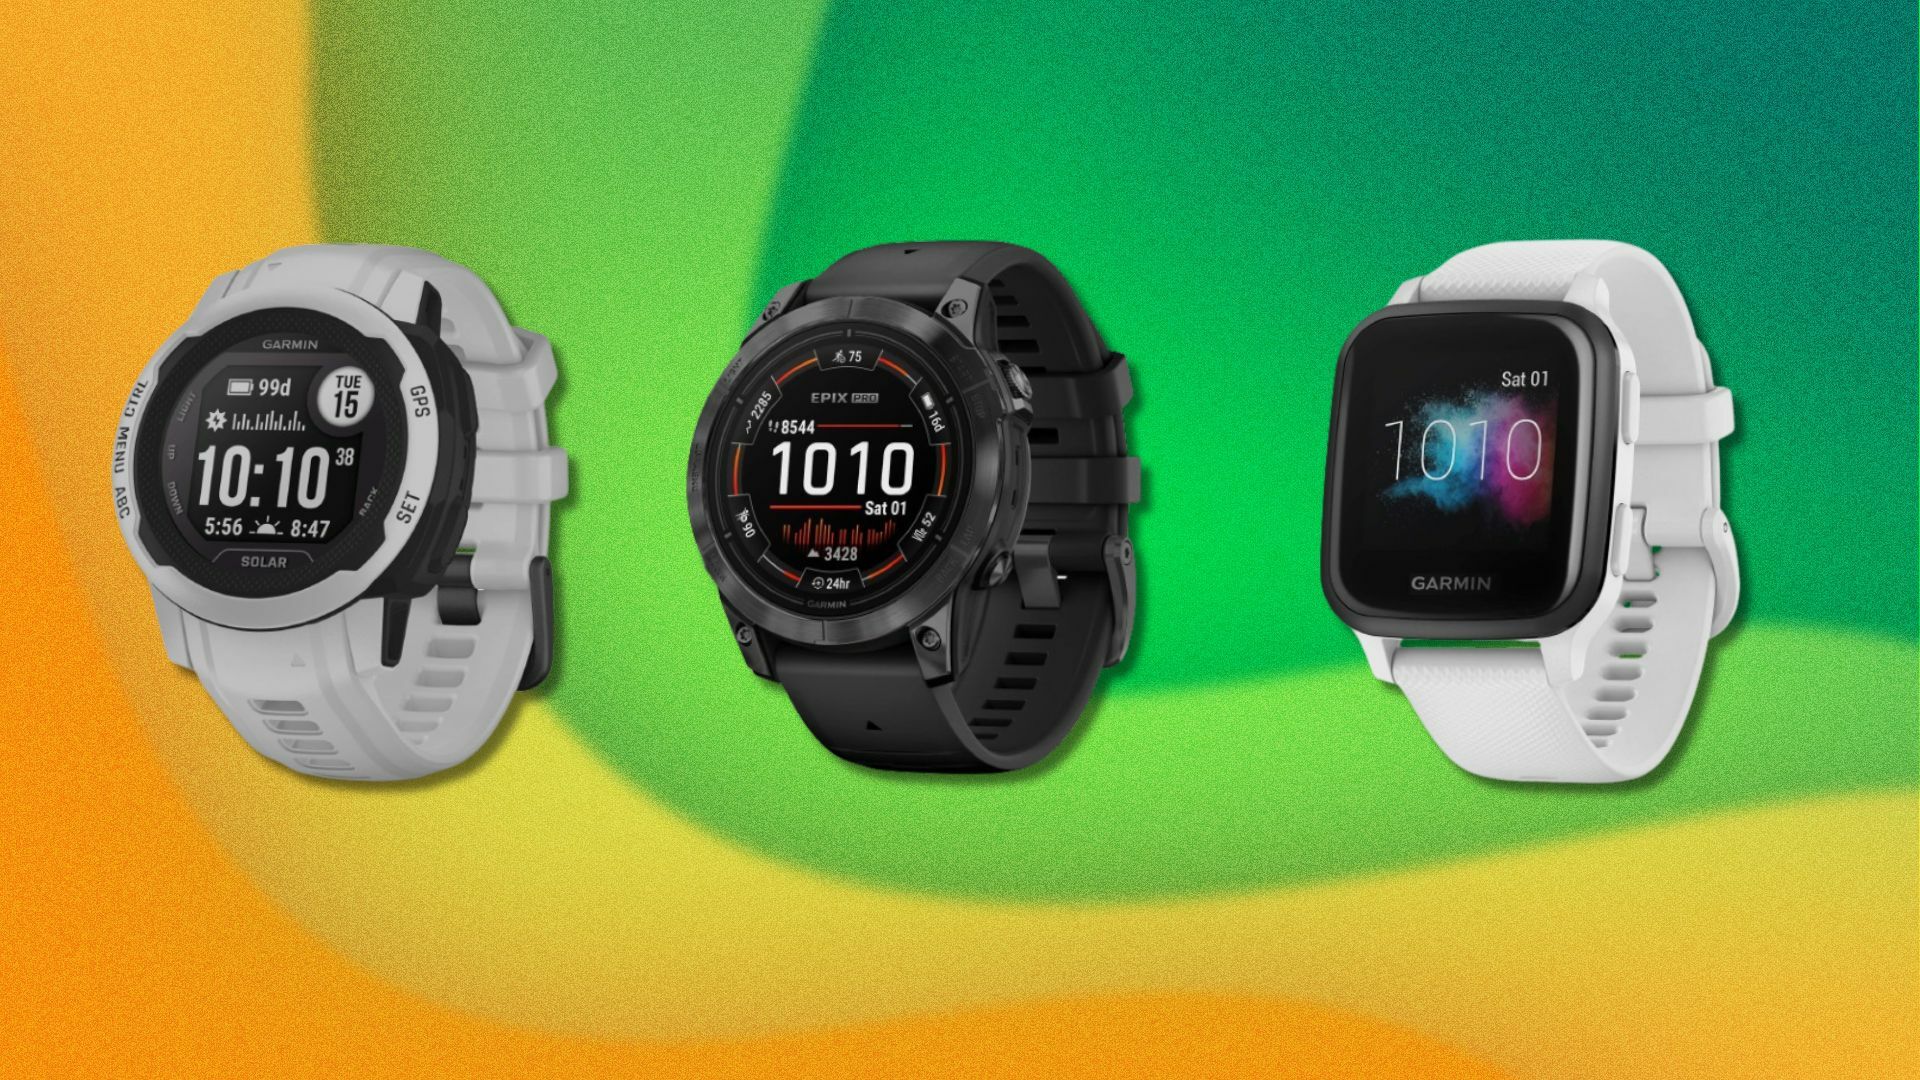 three garmin smartwatches on a wavy yellow and green background